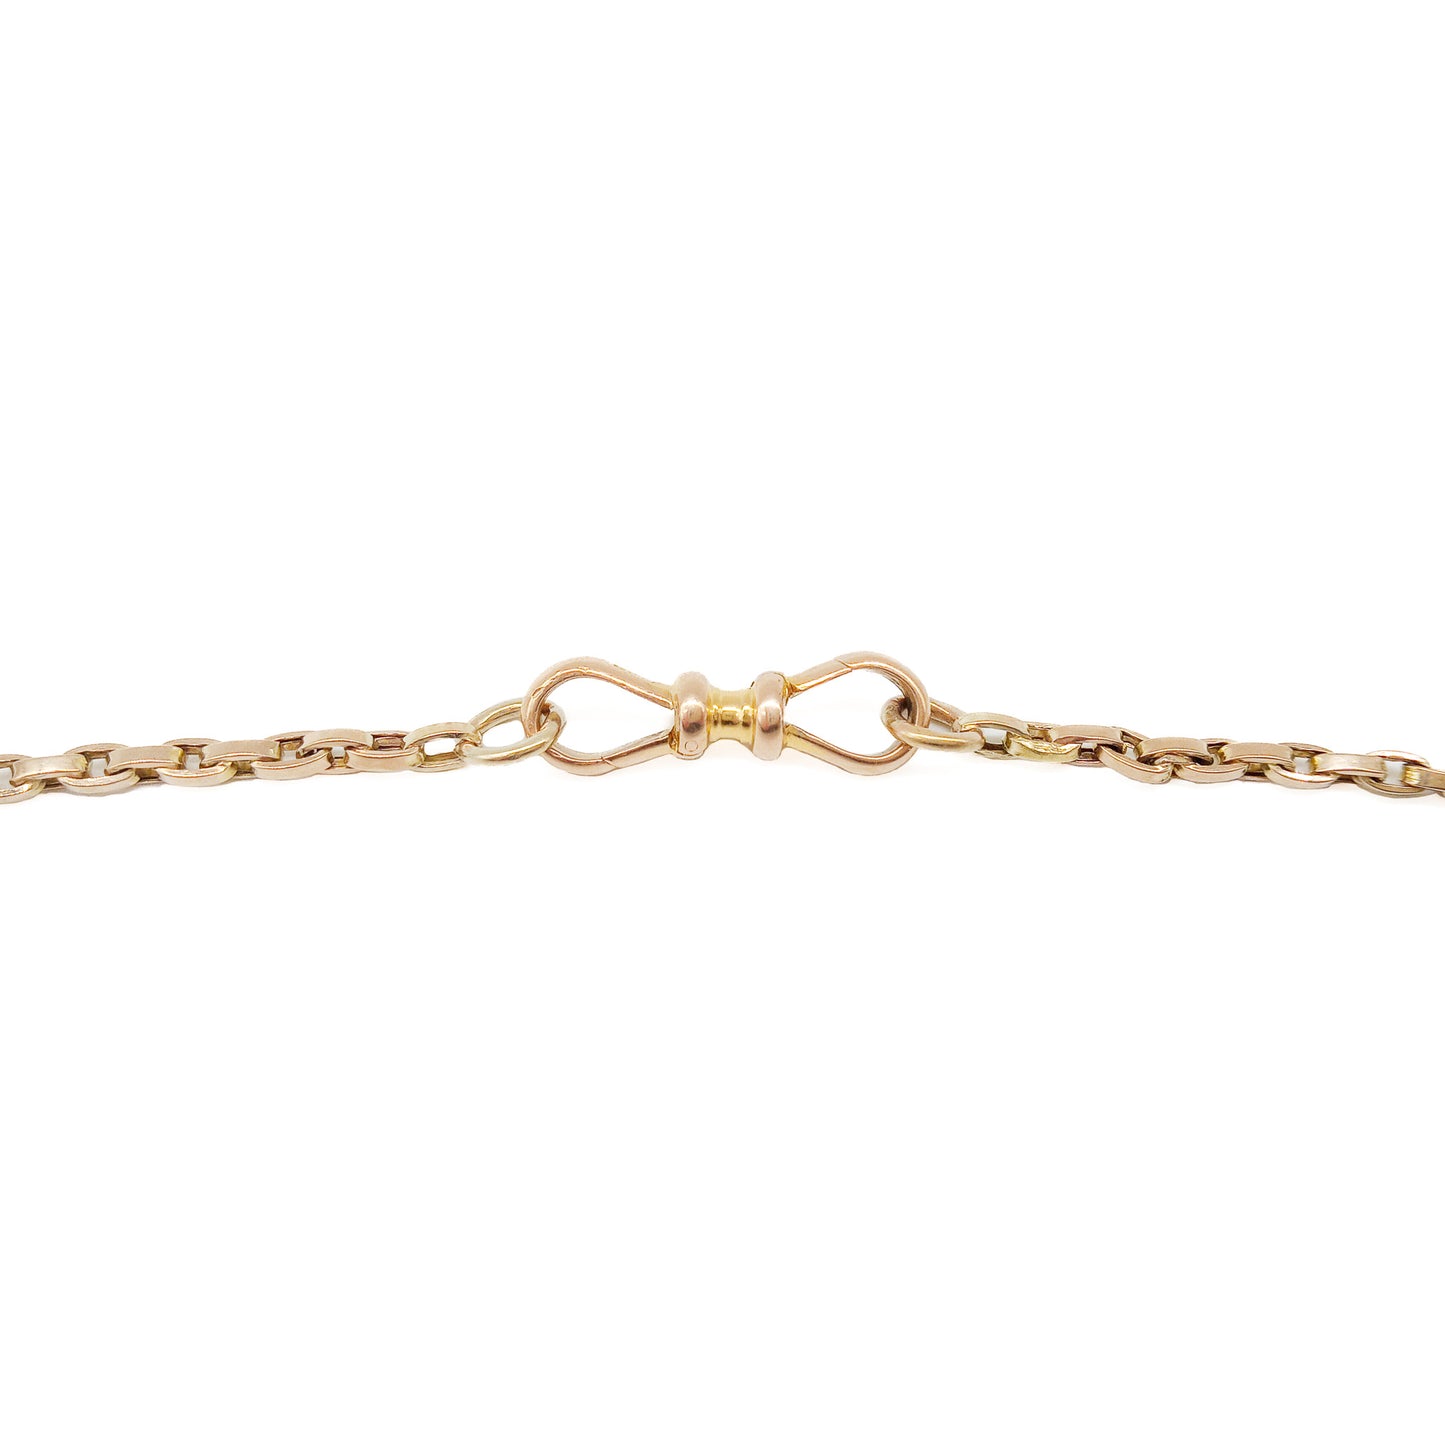 Classic 15ct rose gold Victorian box link chain with a double dog-clip clasp. Long enough to comfortably be worn as a triple chain.